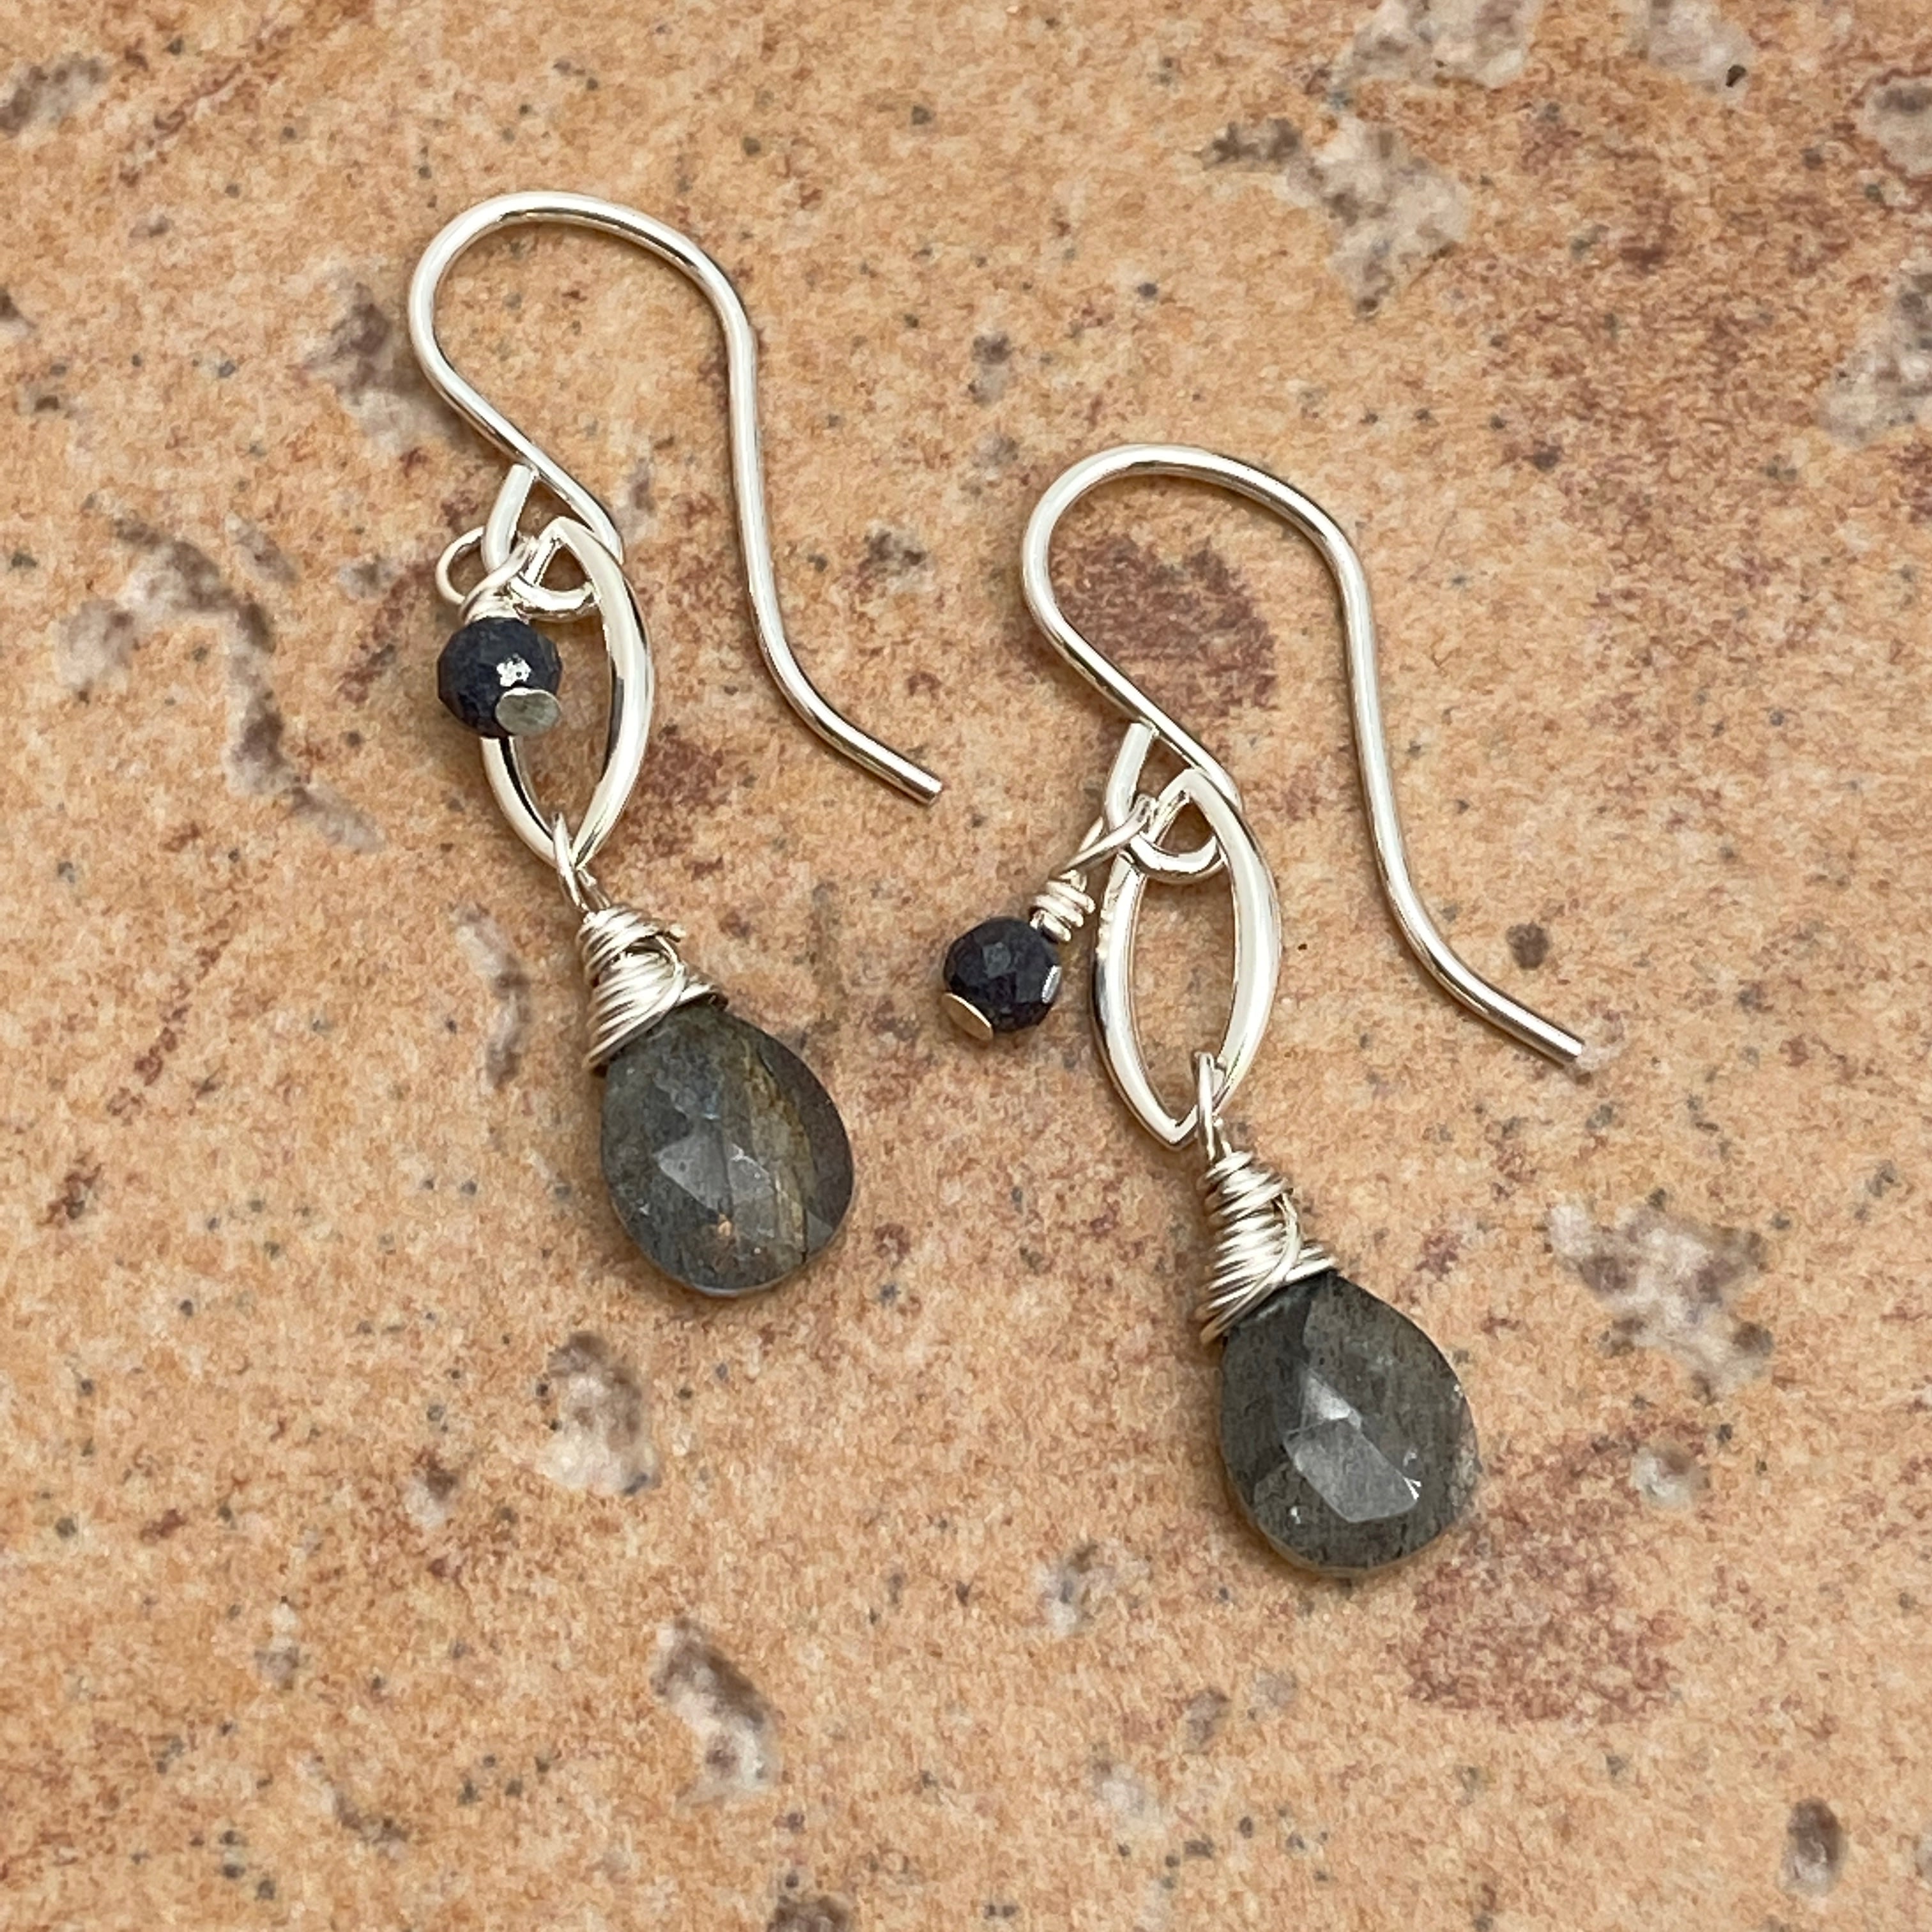 Two Stone Marquis Earrings